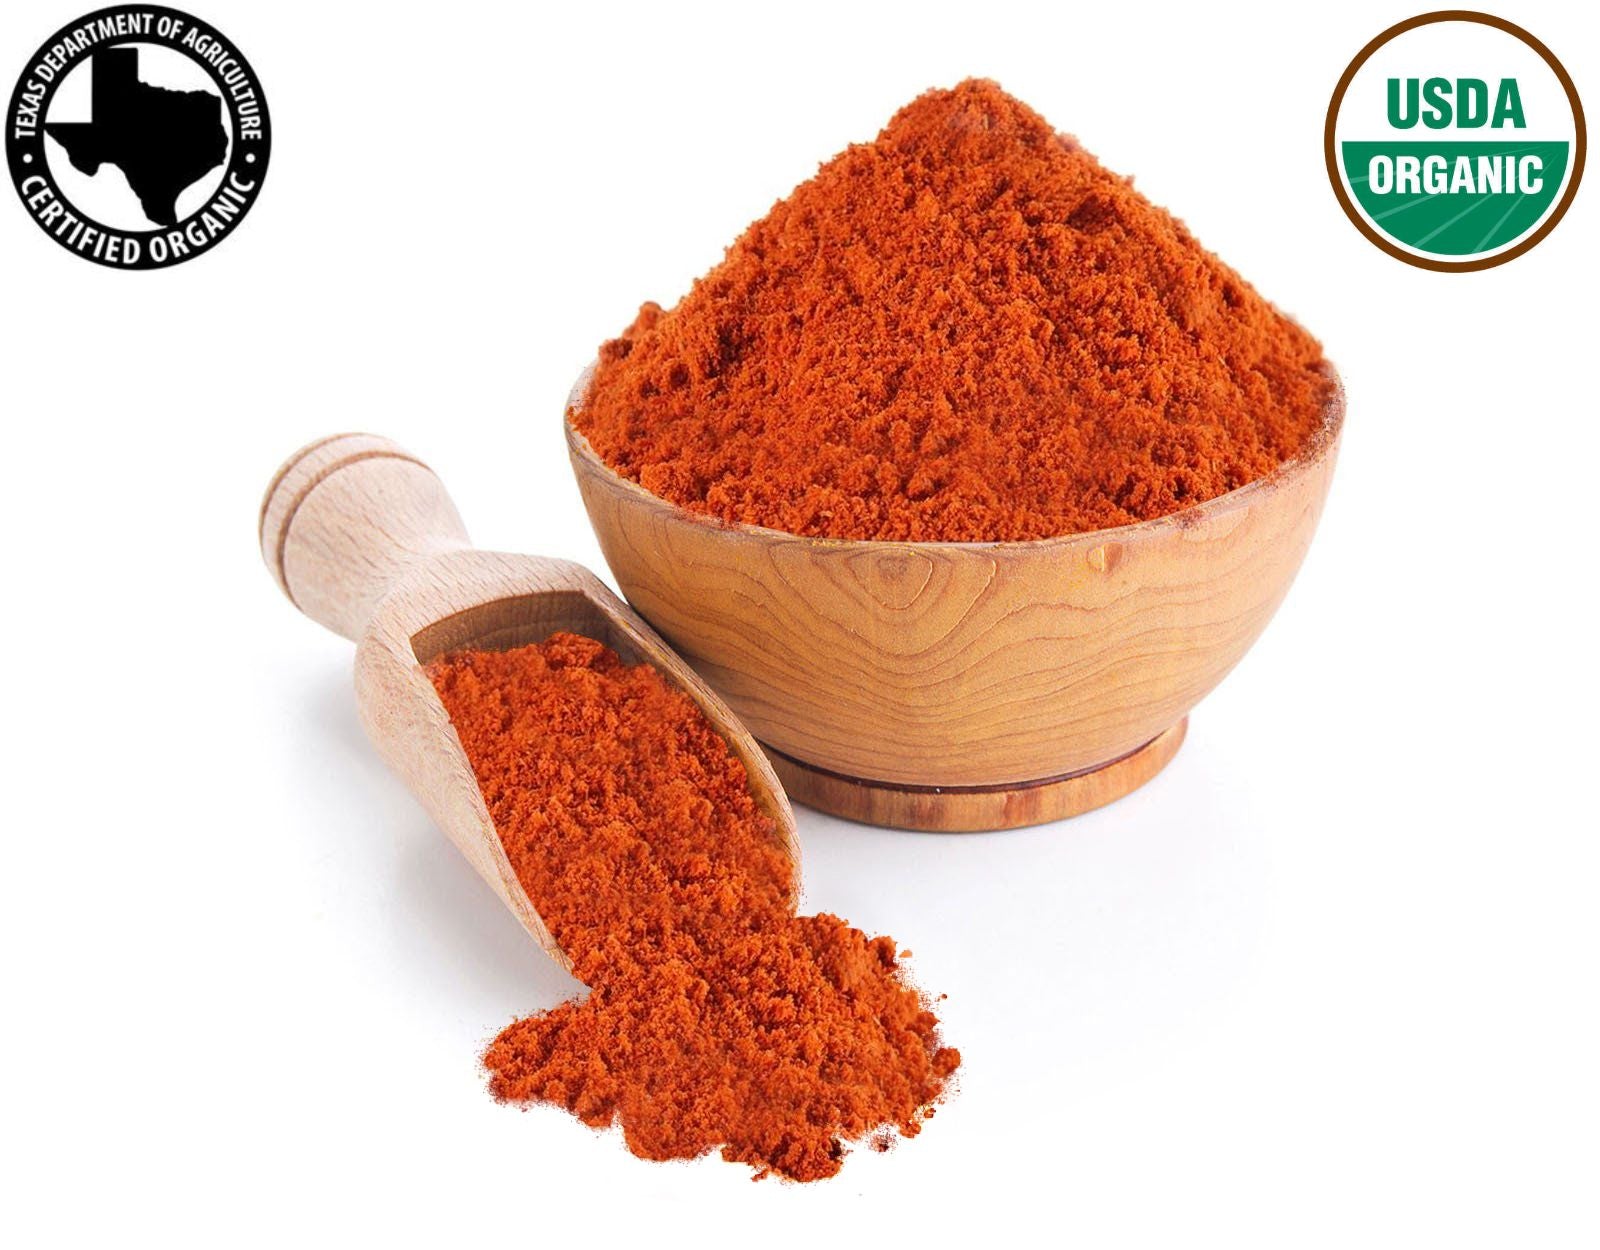 Organic Red Chili Powder: 100% Pure and Natural, Perfect for Spicy Cooking- Add Heat and Flavor to Your Dishes - image 3 of 6